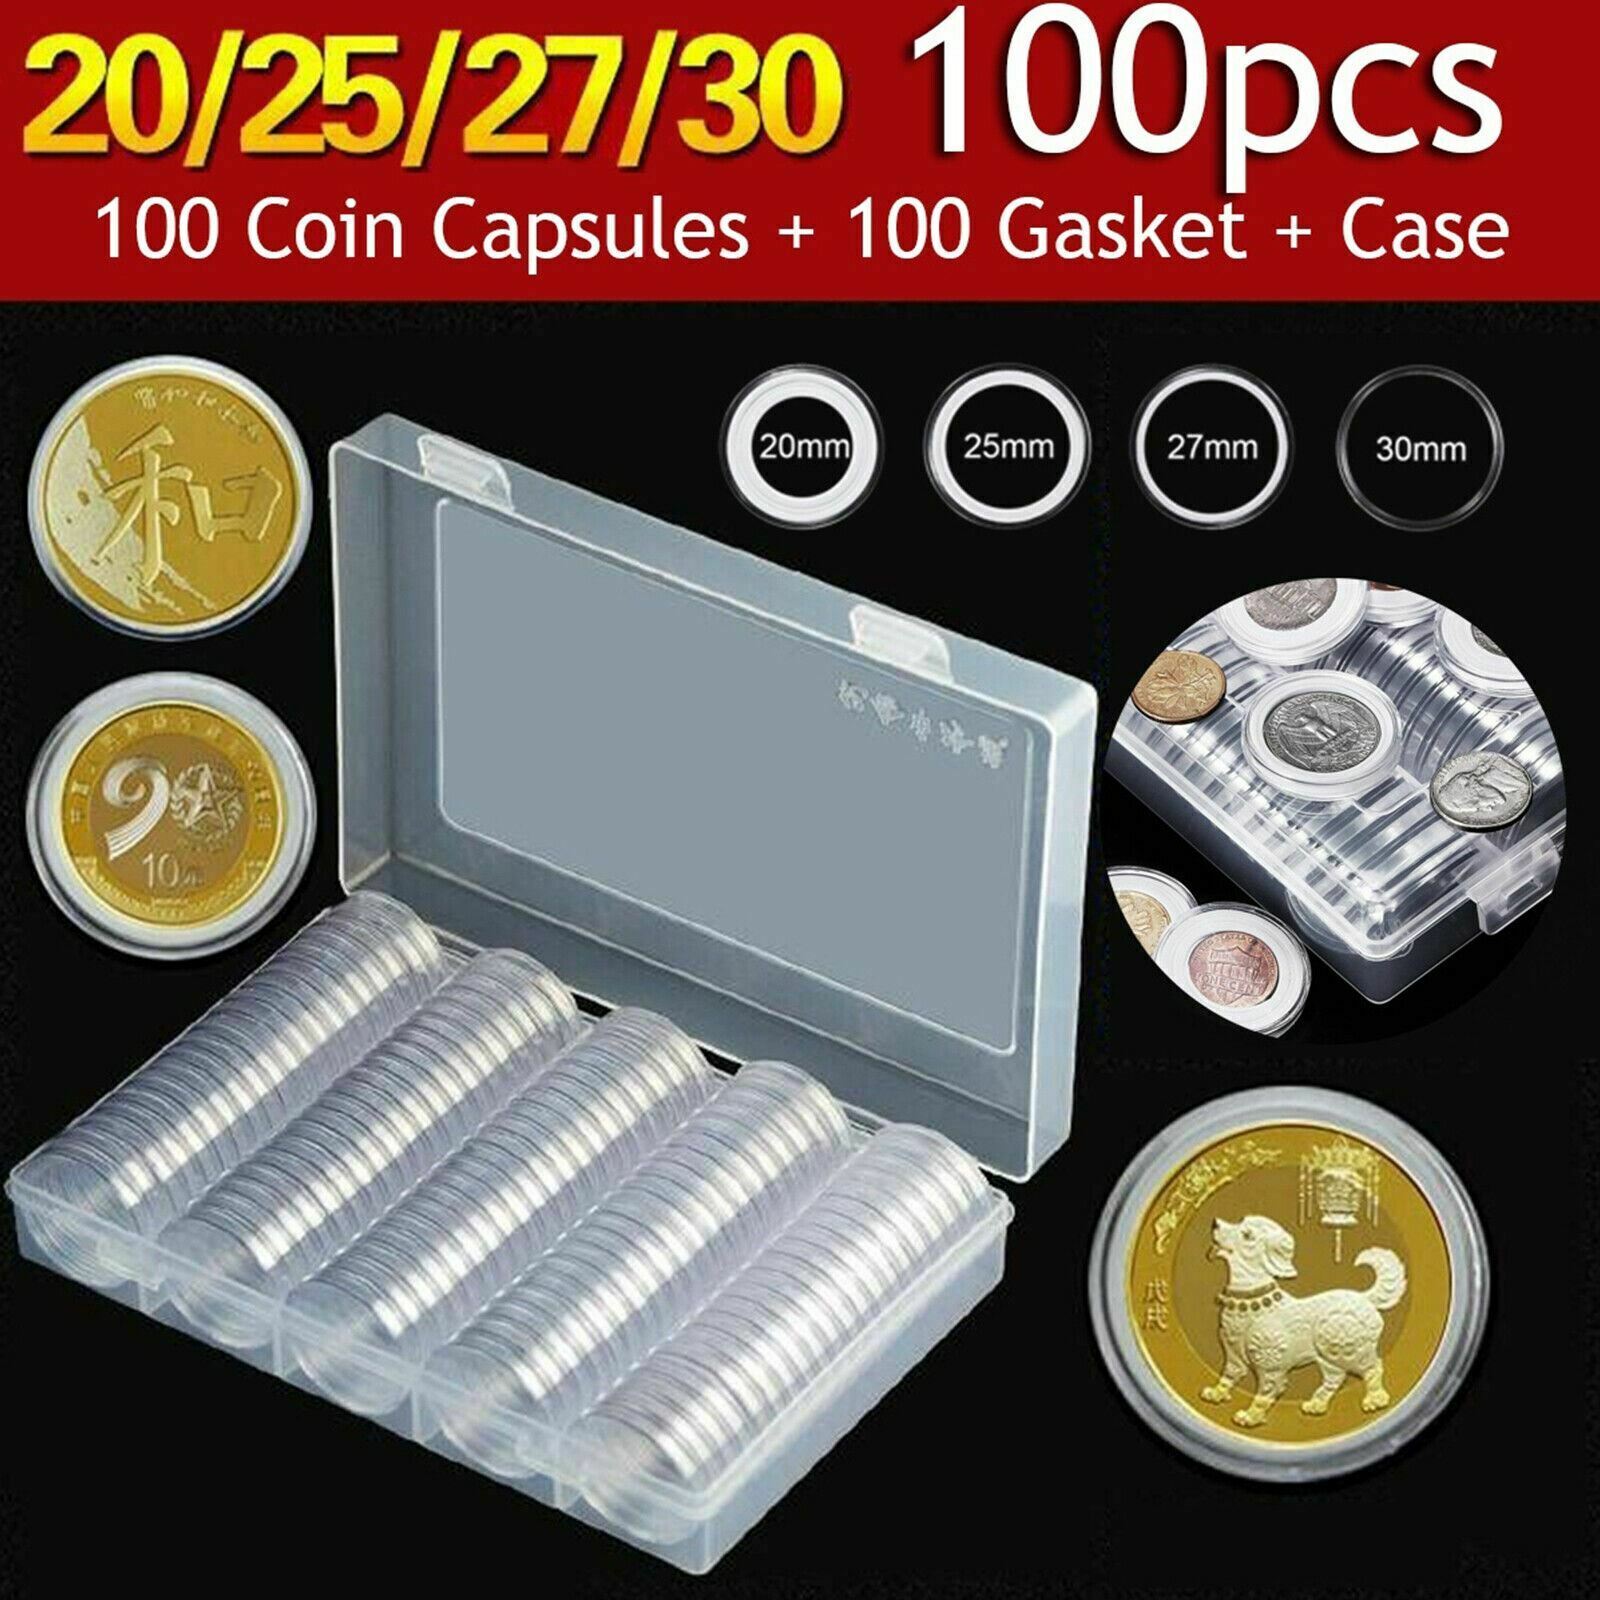 100Pcs 20/25/27/30mm Coin Clear Plastic Round Capsules Case Holder Storage Box